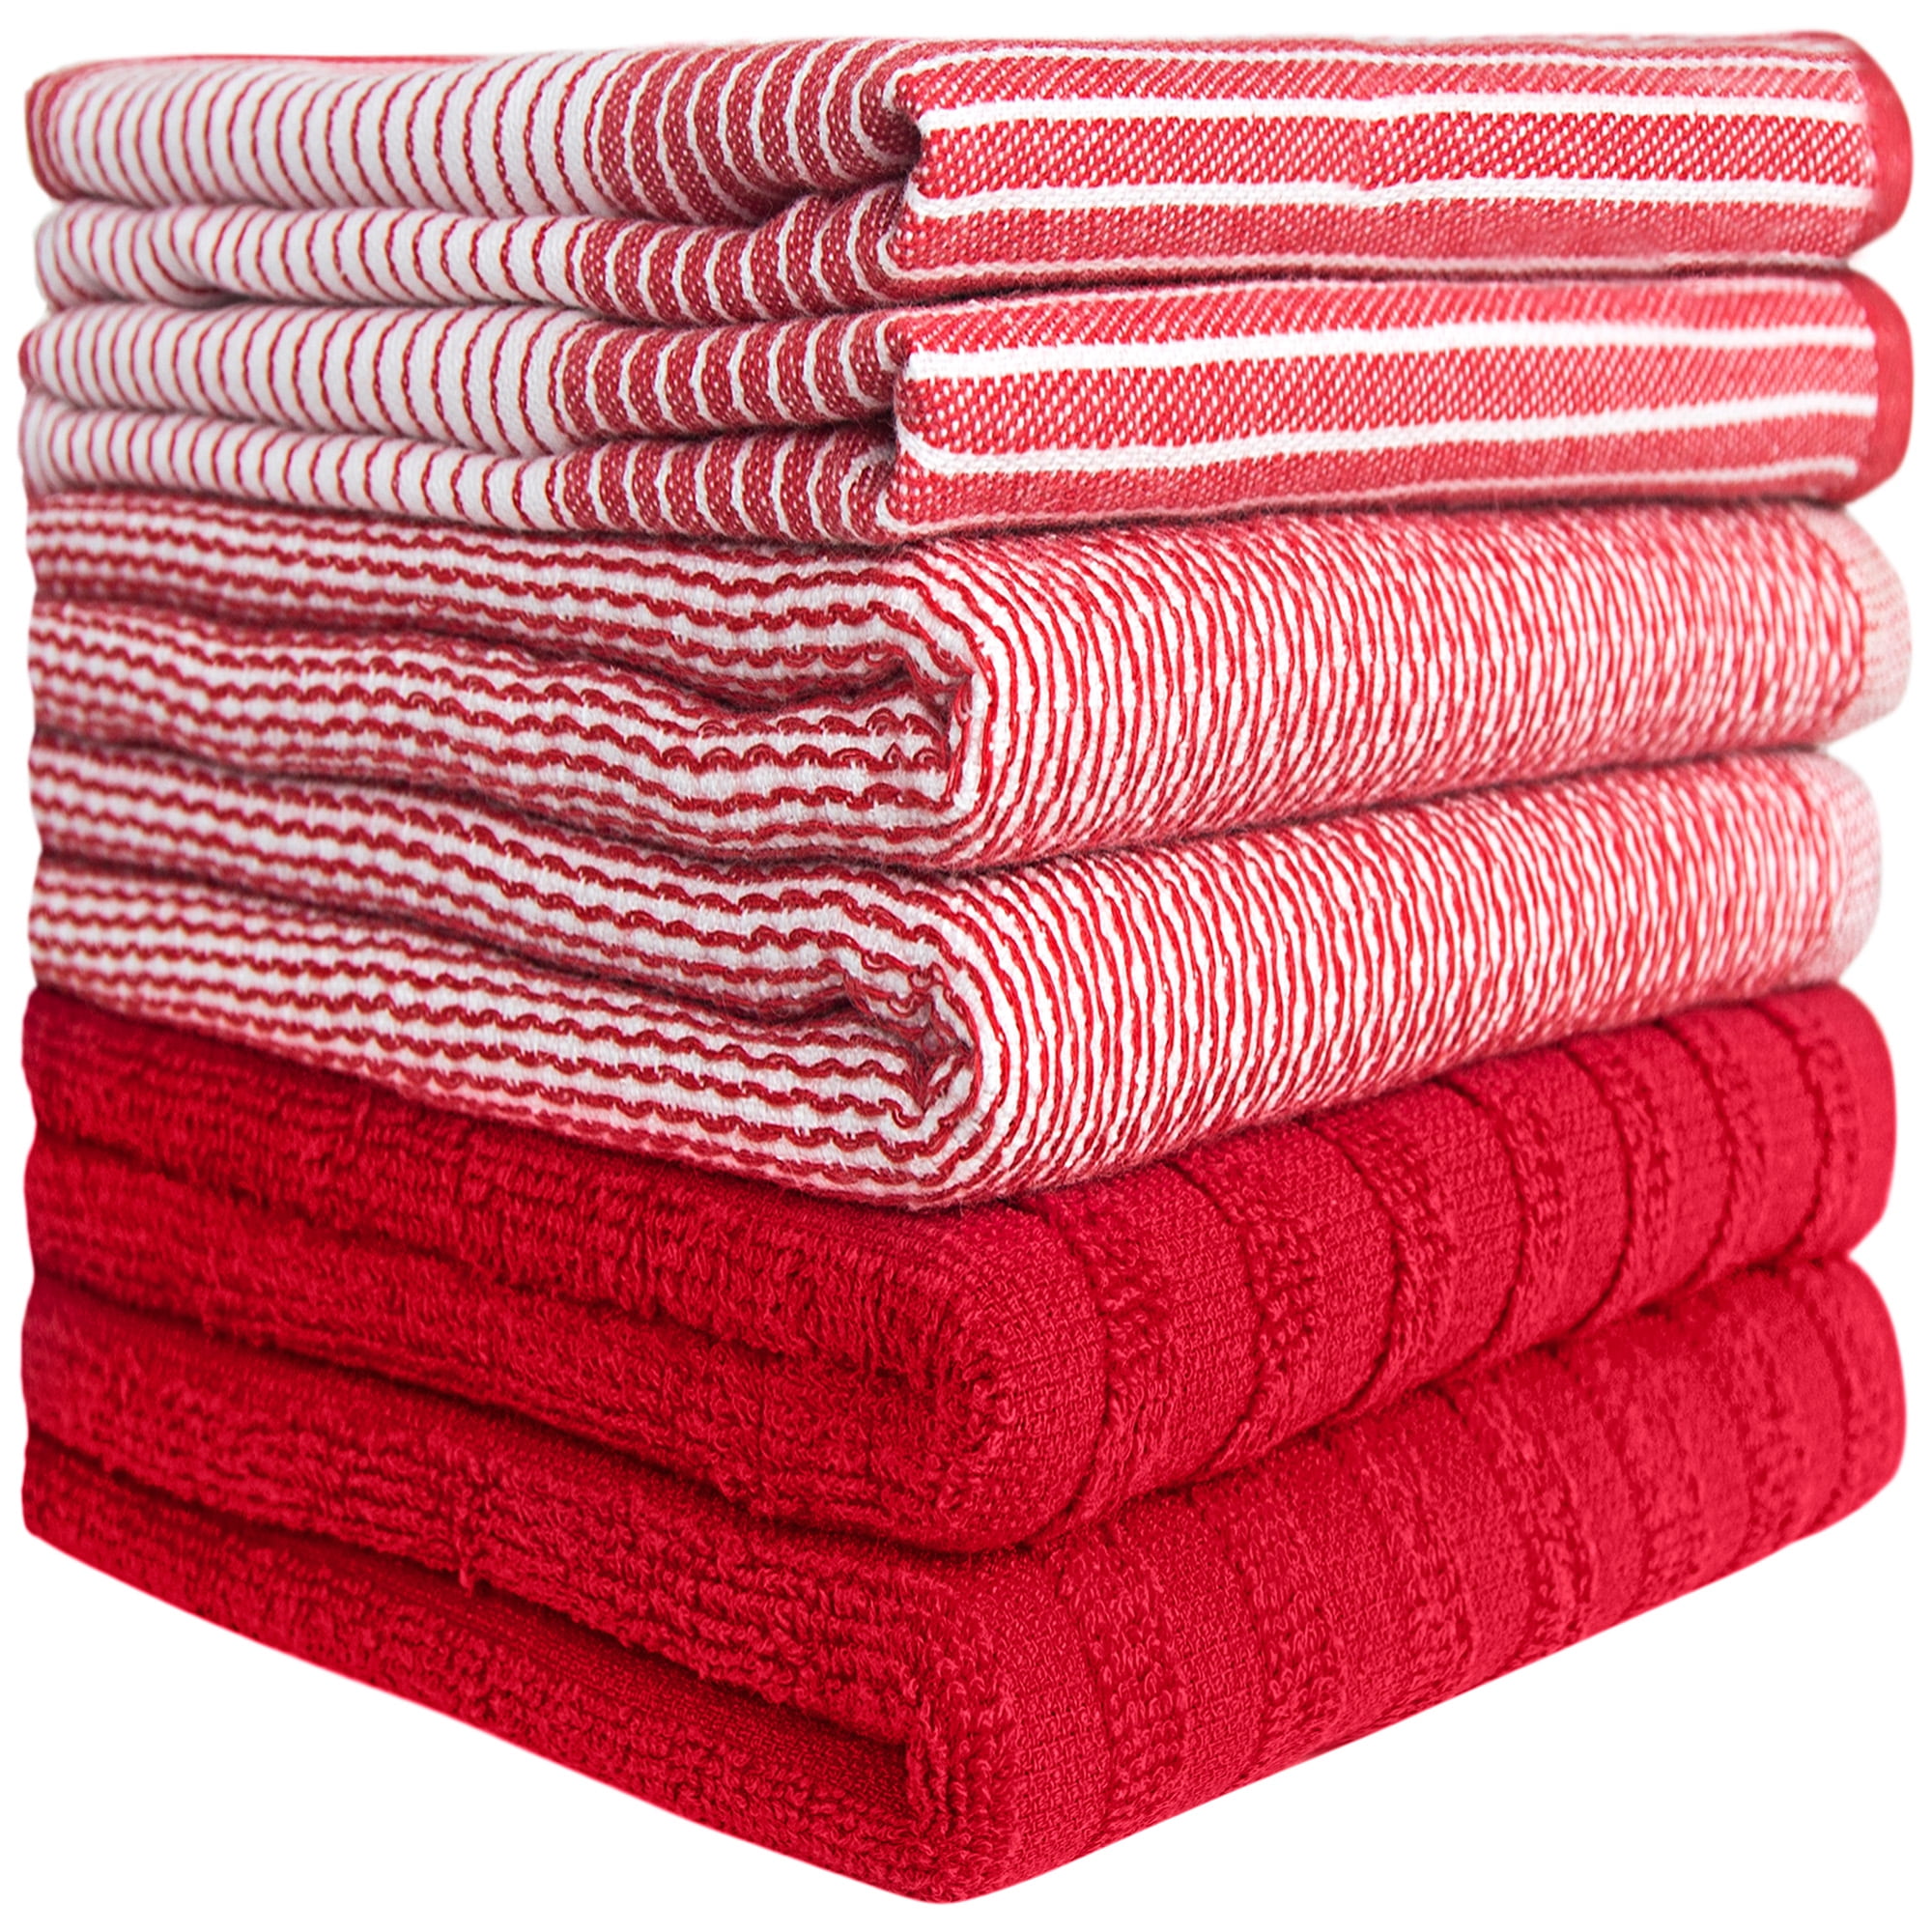 Infinitee Xclusives Premium Kitchen Towels – Pack of 6, 100% Cotton 15 x 25 Inches Absorbent Dish Towels - 425 GSM Tea Towel, Terry Kitchen Dishclot